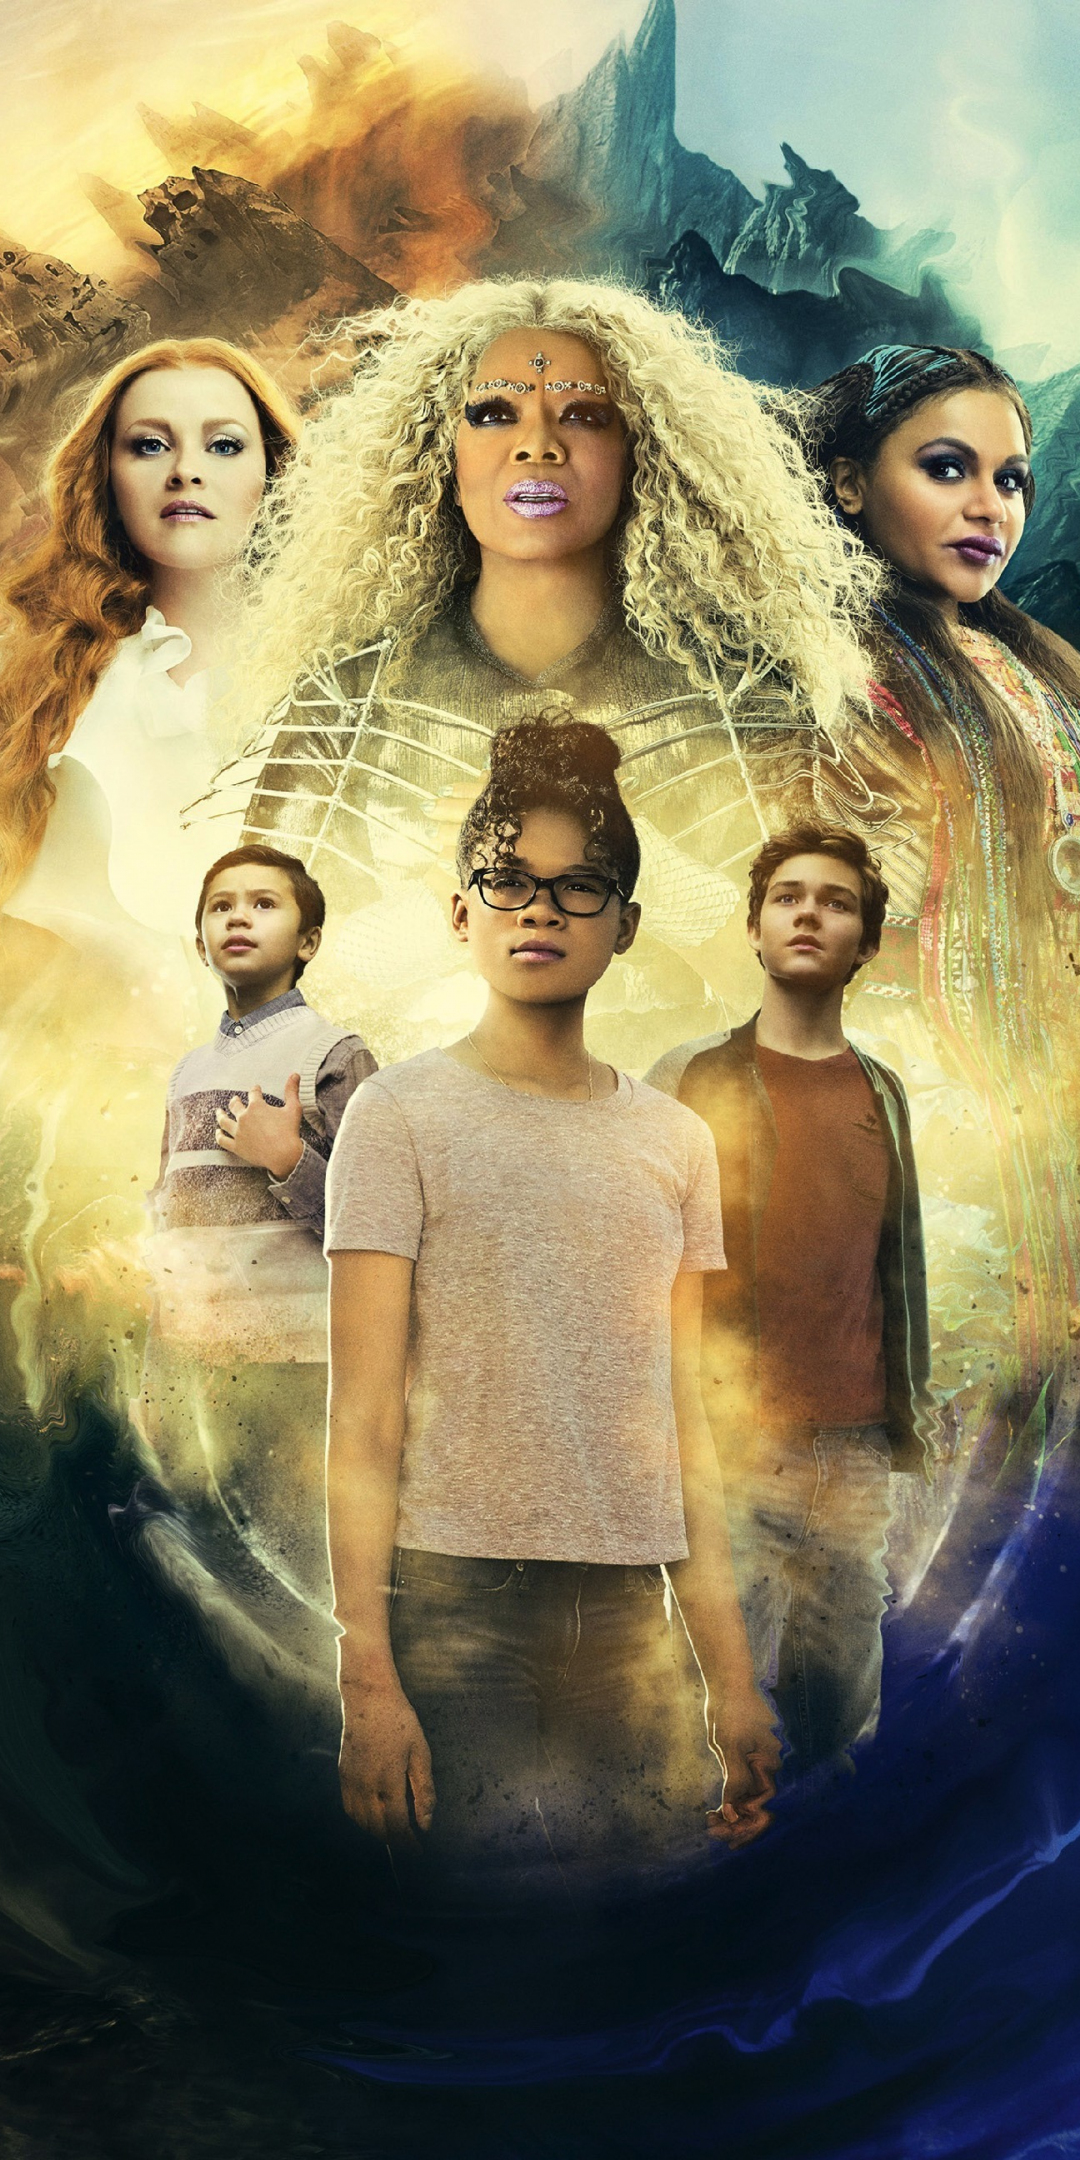 A Wrinkle in Time, 2018 movie, waves, poster, 1080x2160 wallpaper